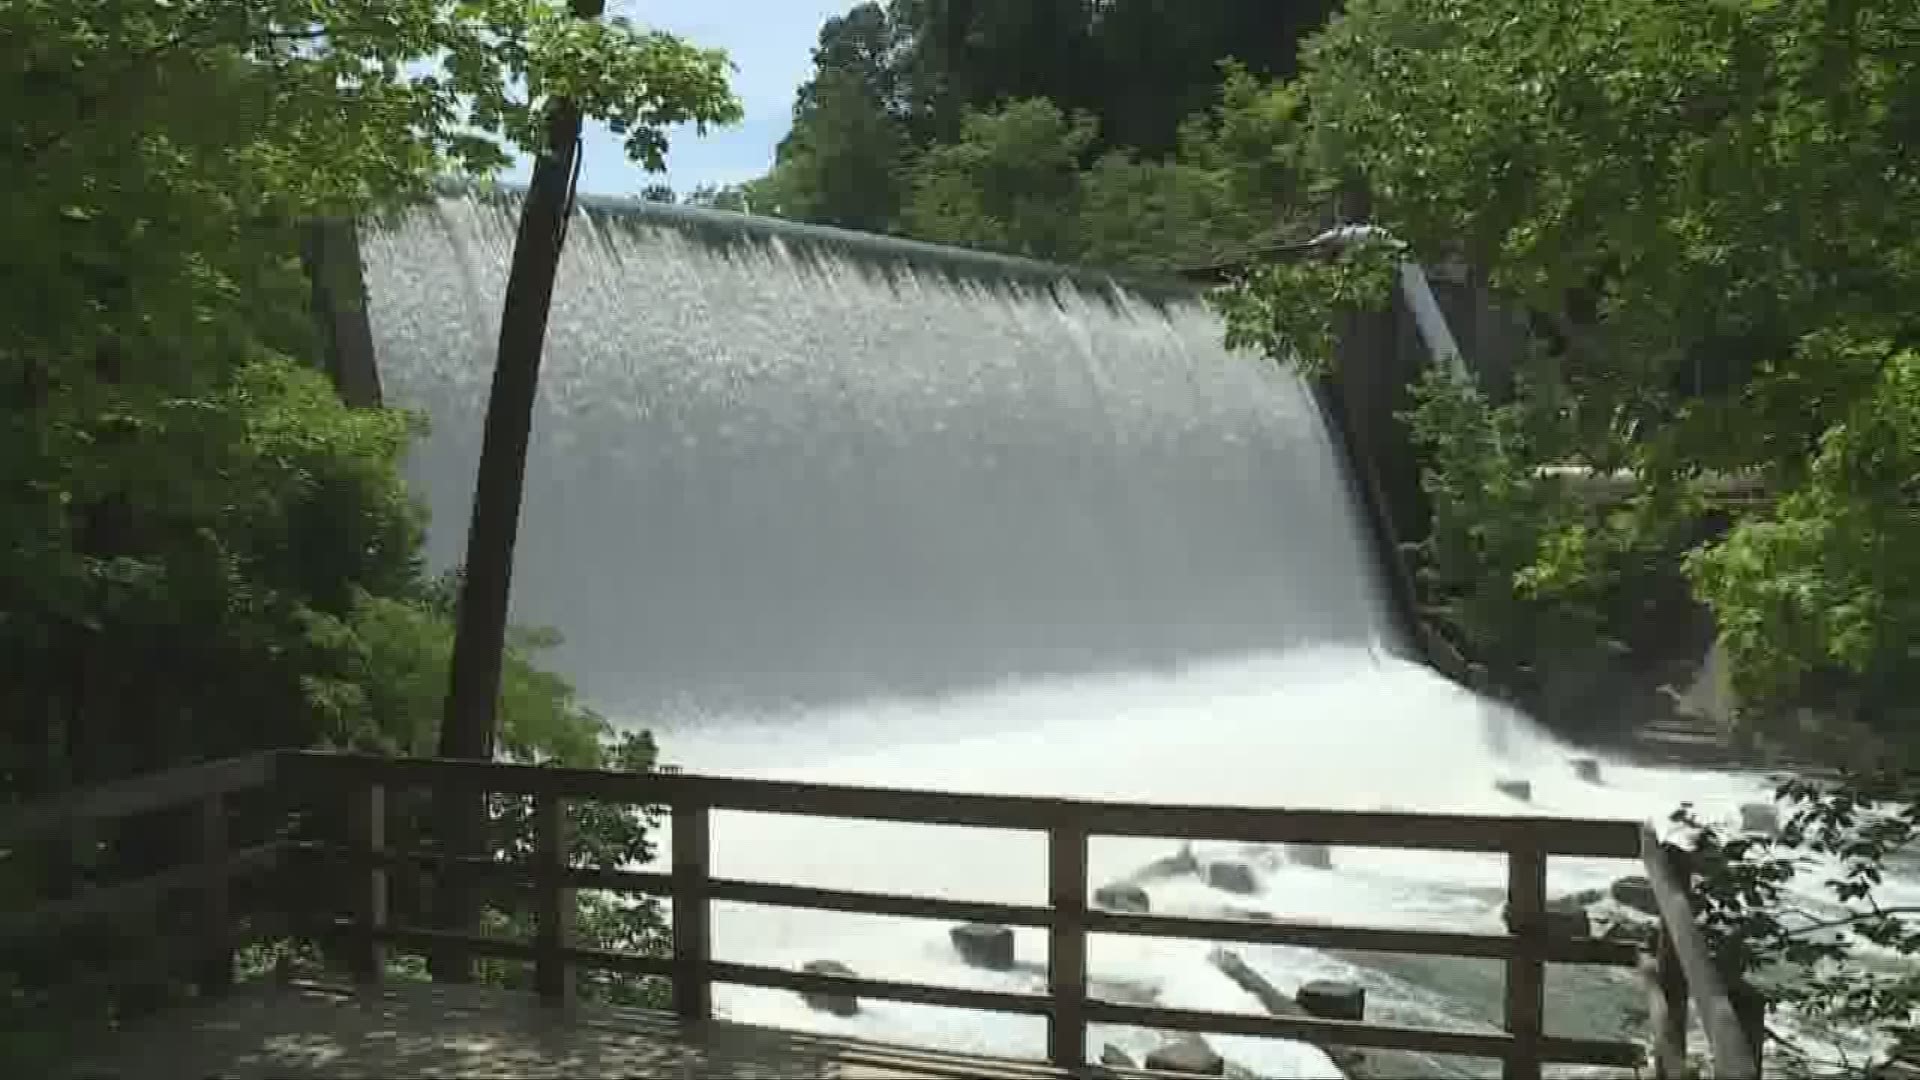 What's in-store for the Gorge Dam?